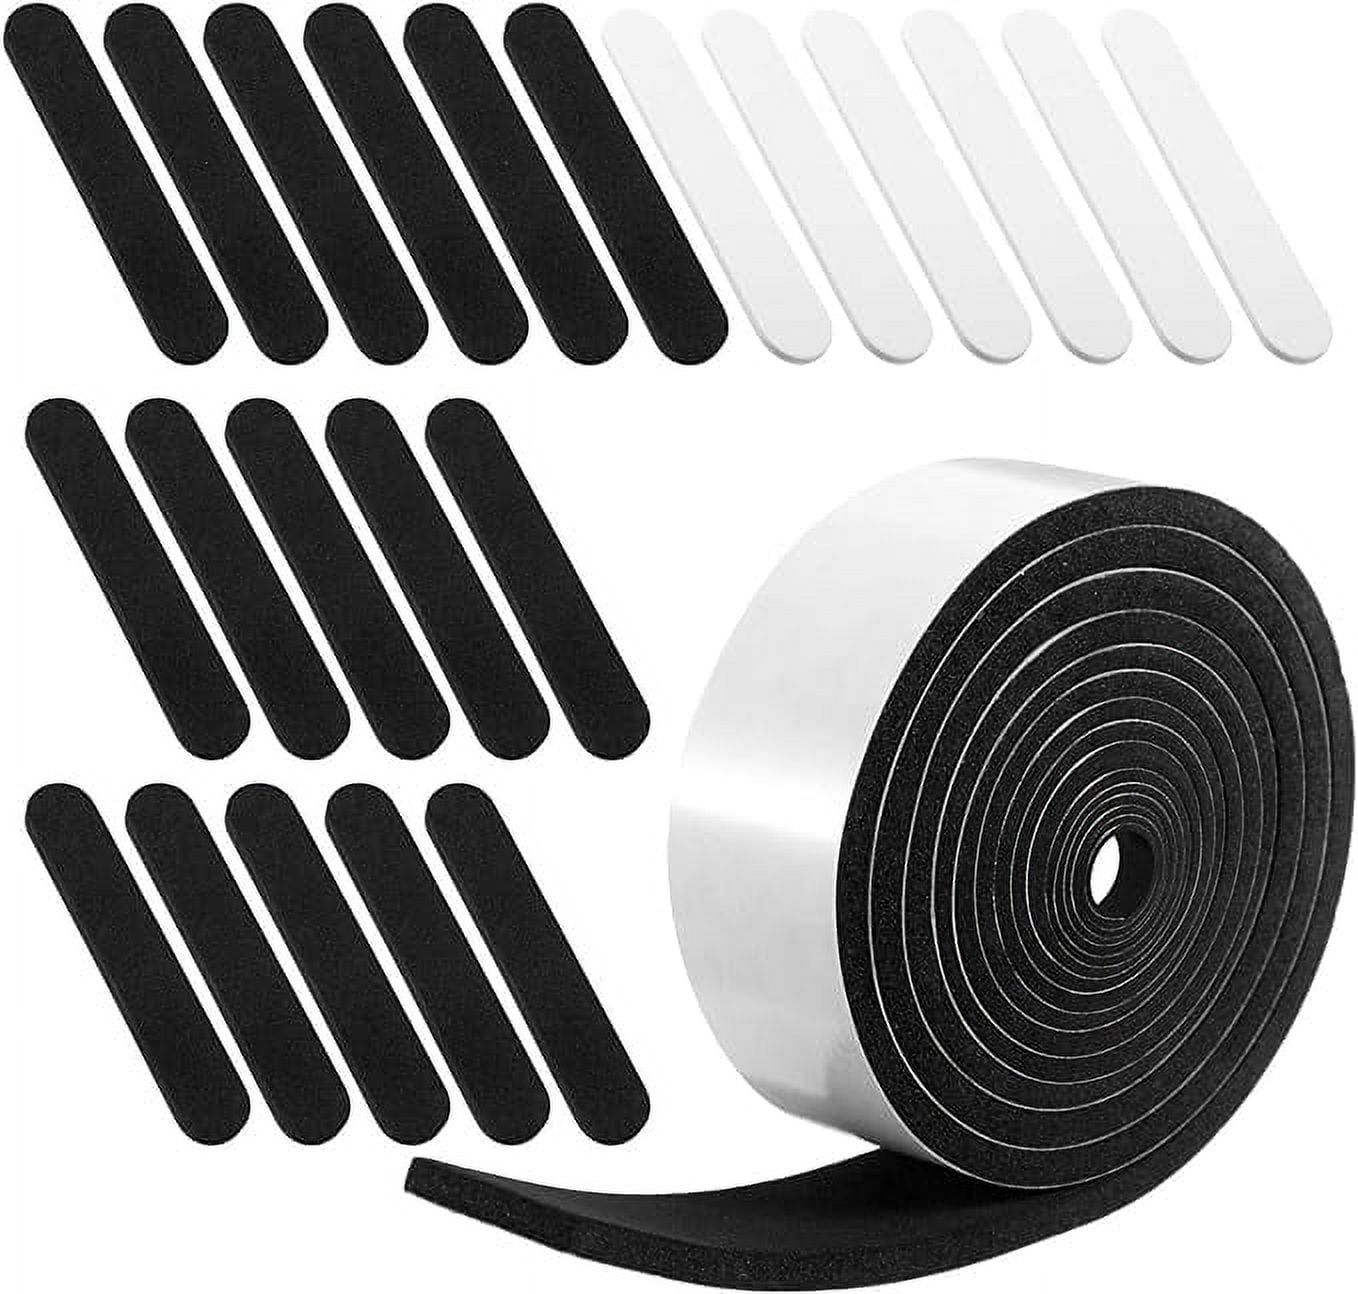  Yolev 30pcs Hat Size Tape Hat Size Reducer Foam Reducing Tape  Self Adhesive Sweat Breathable for Men and Women Cap Grey : Tools & Home  Improvement